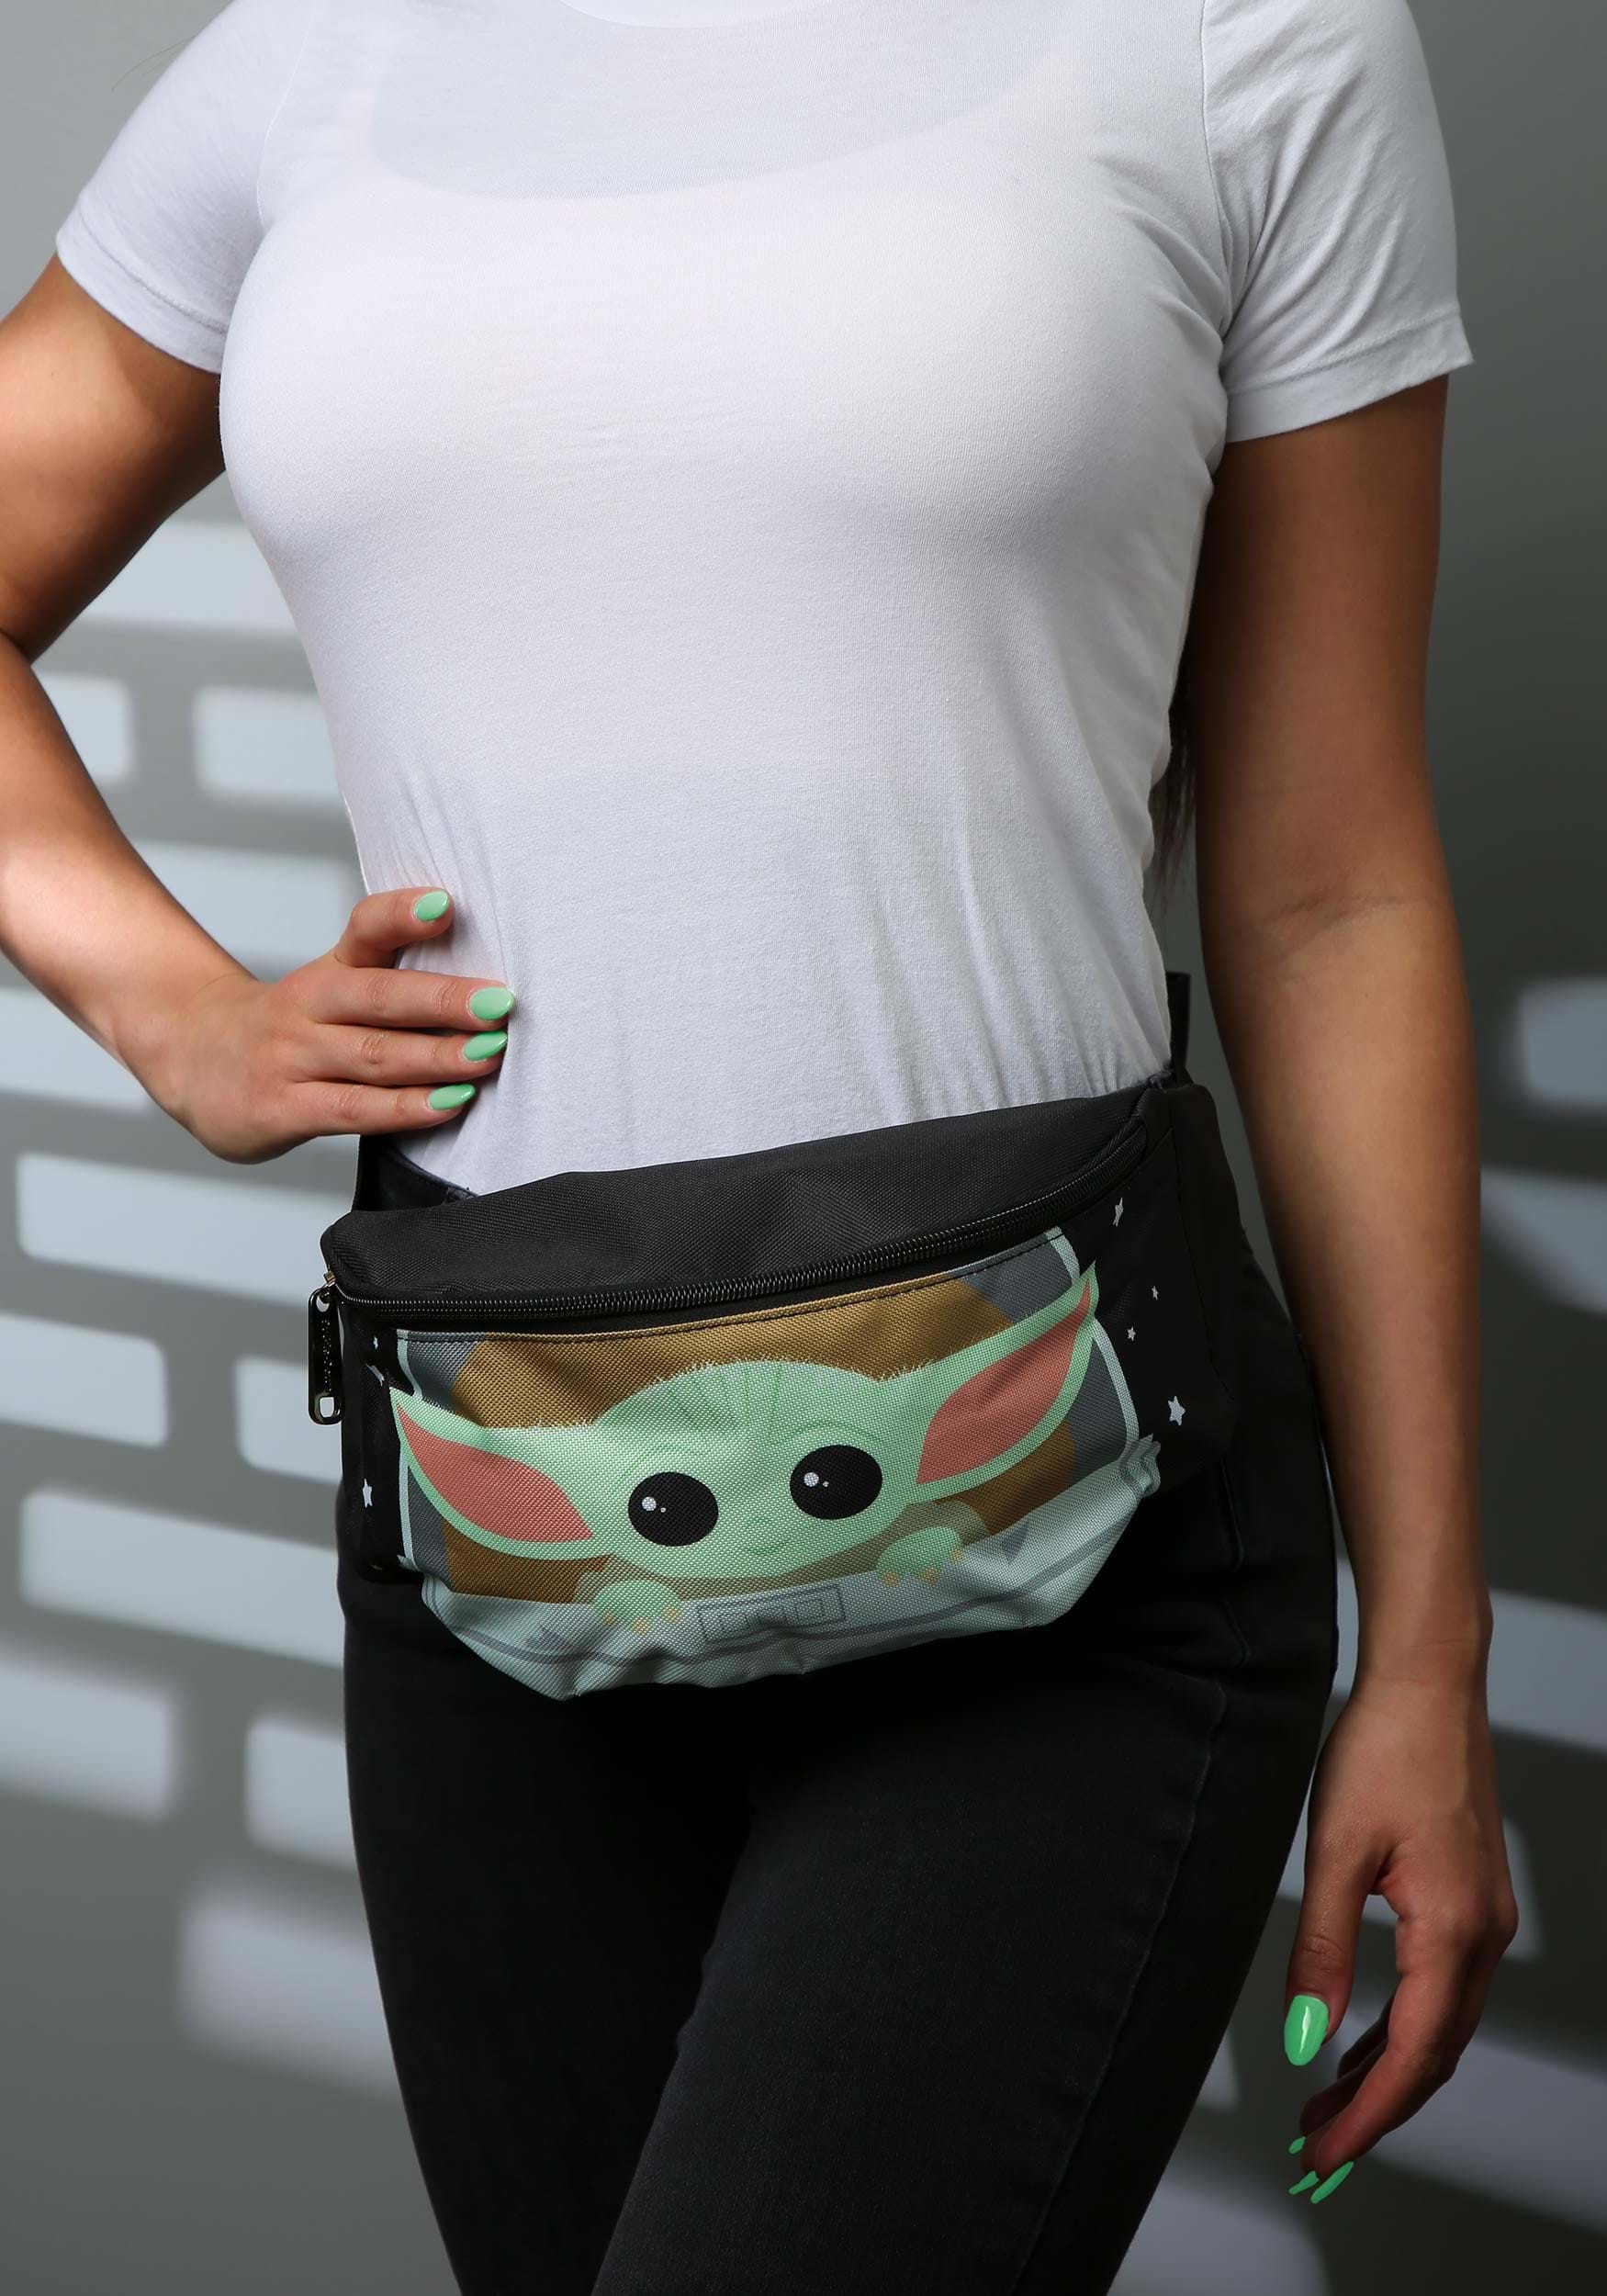 The Child Star Wars Fanny Pack